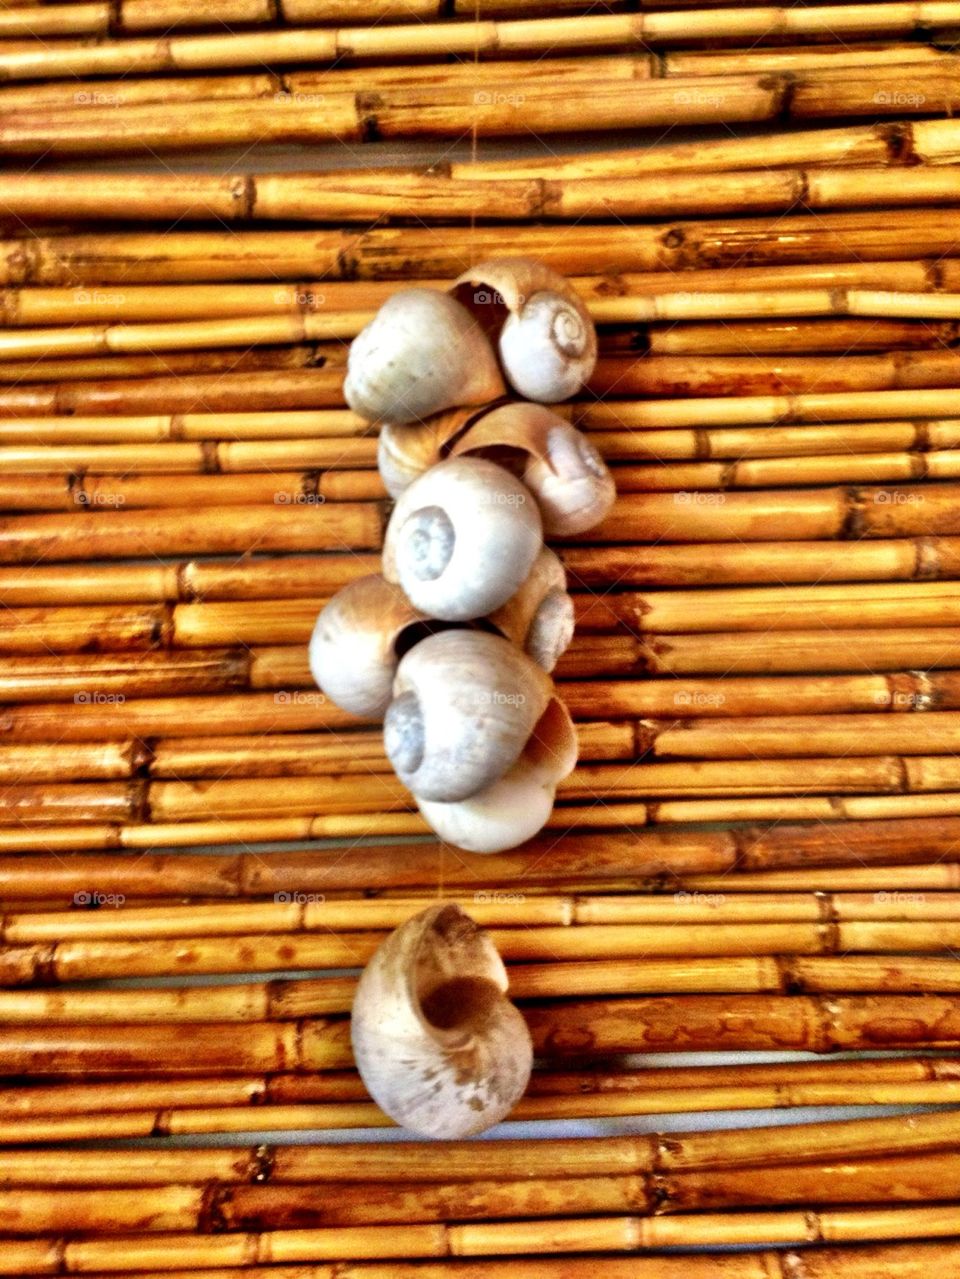 Fine shells adorning the wall!